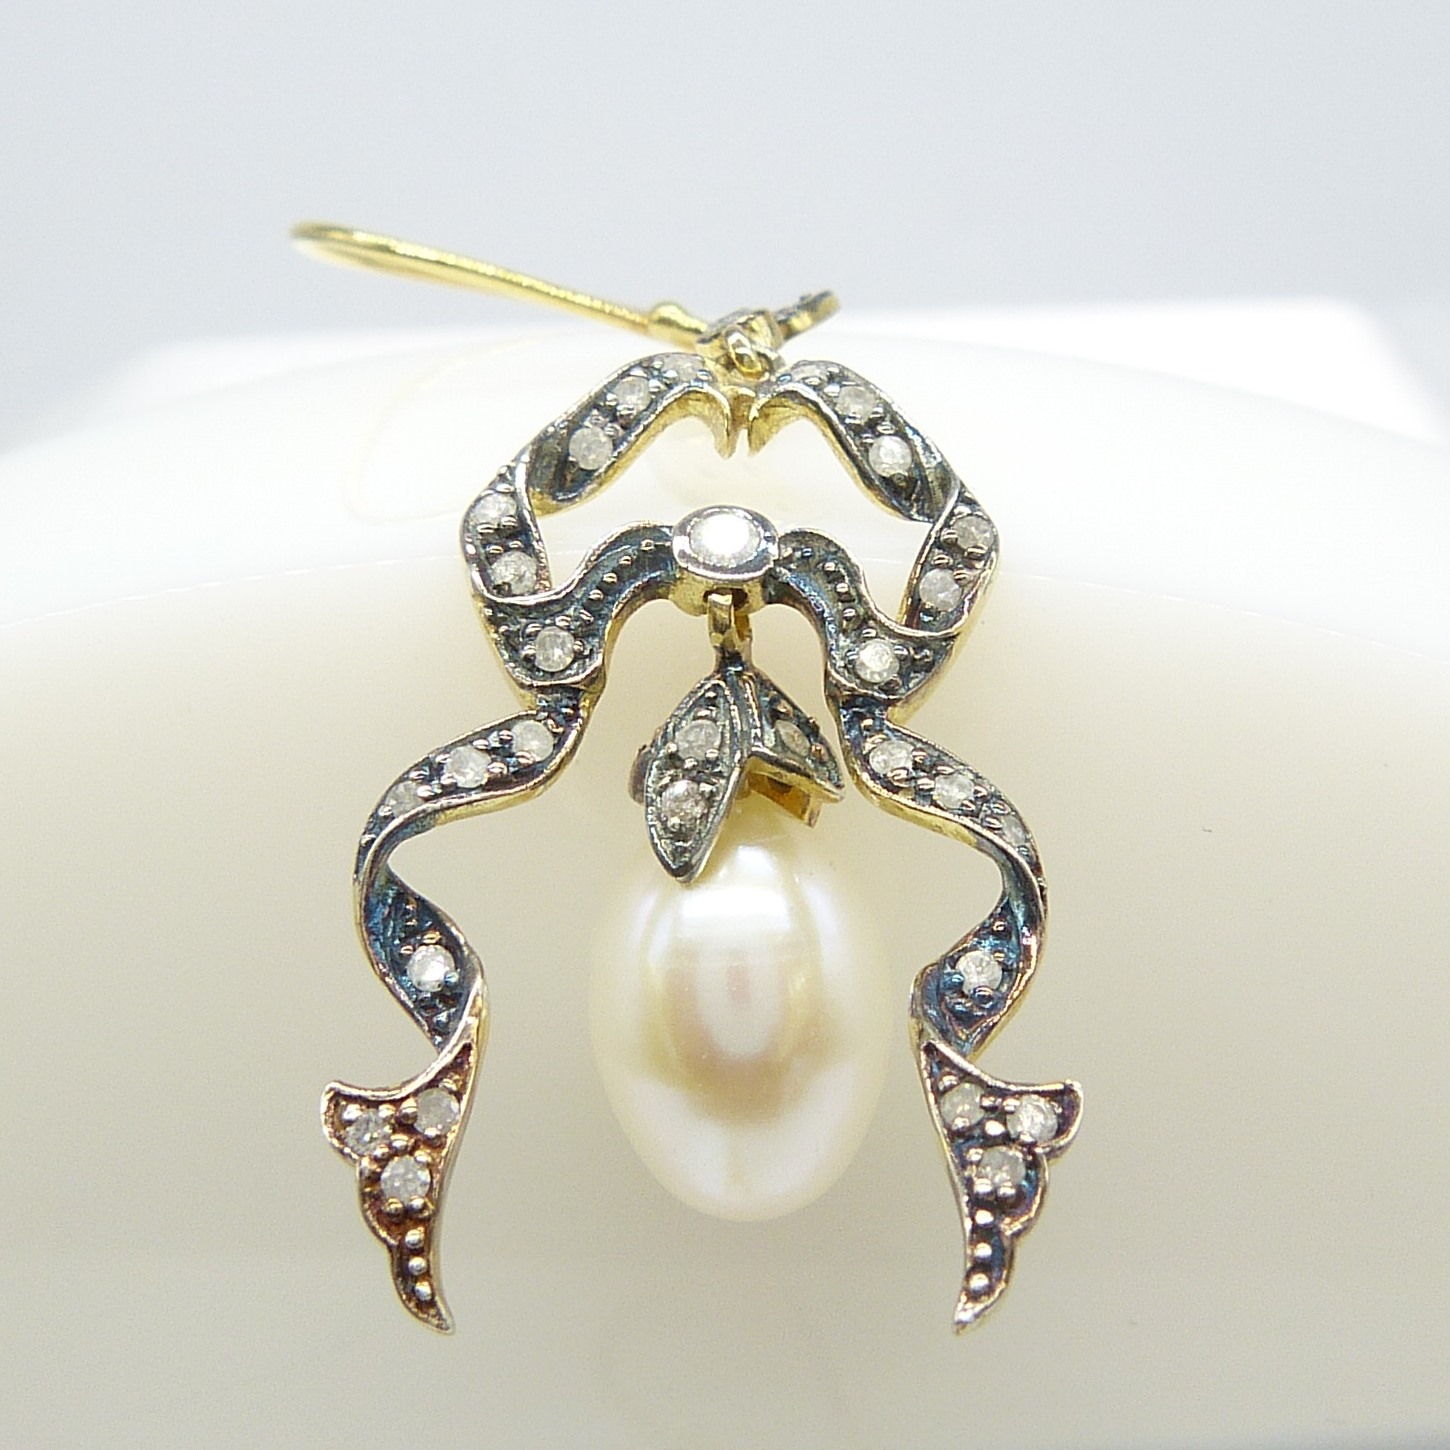 A pair of long drop ribbon-style earrings set with cultured pearls and Diamonds - Image 4 of 7